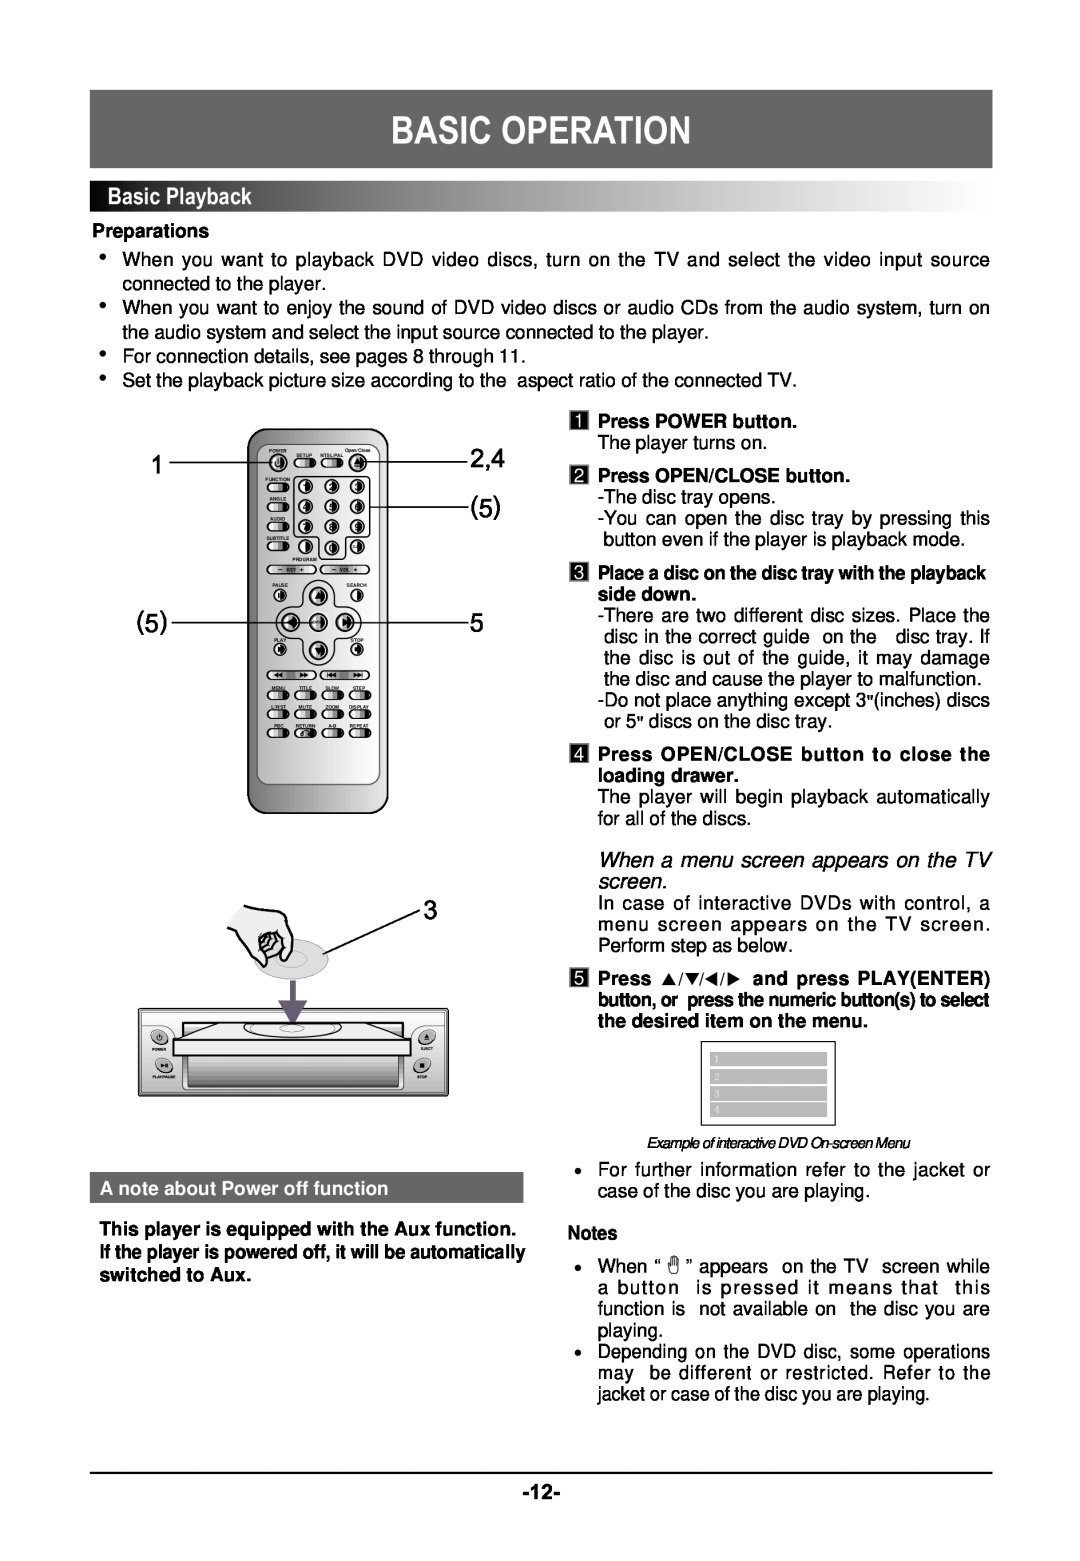 Farenheit Technologies DVD-19 owner manual Basic Operation, BasicPlayback, When a menu screen appears on the TV screen 